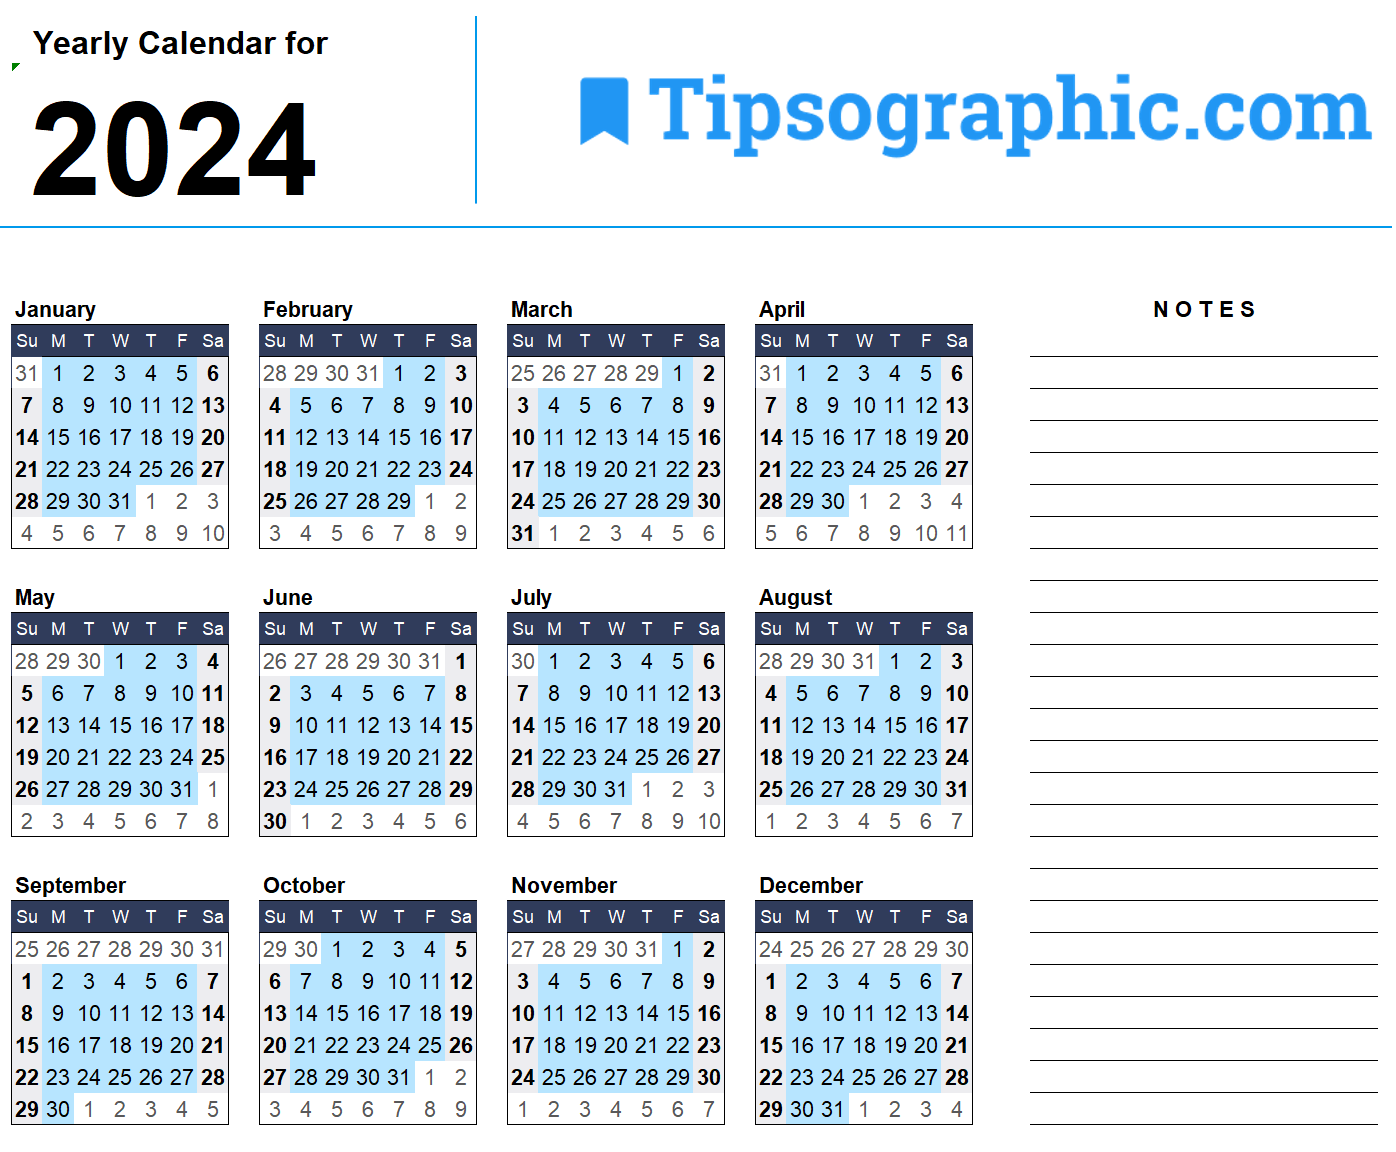 FREE DOWNLOAD > Download the 2024 Yearly Calendar